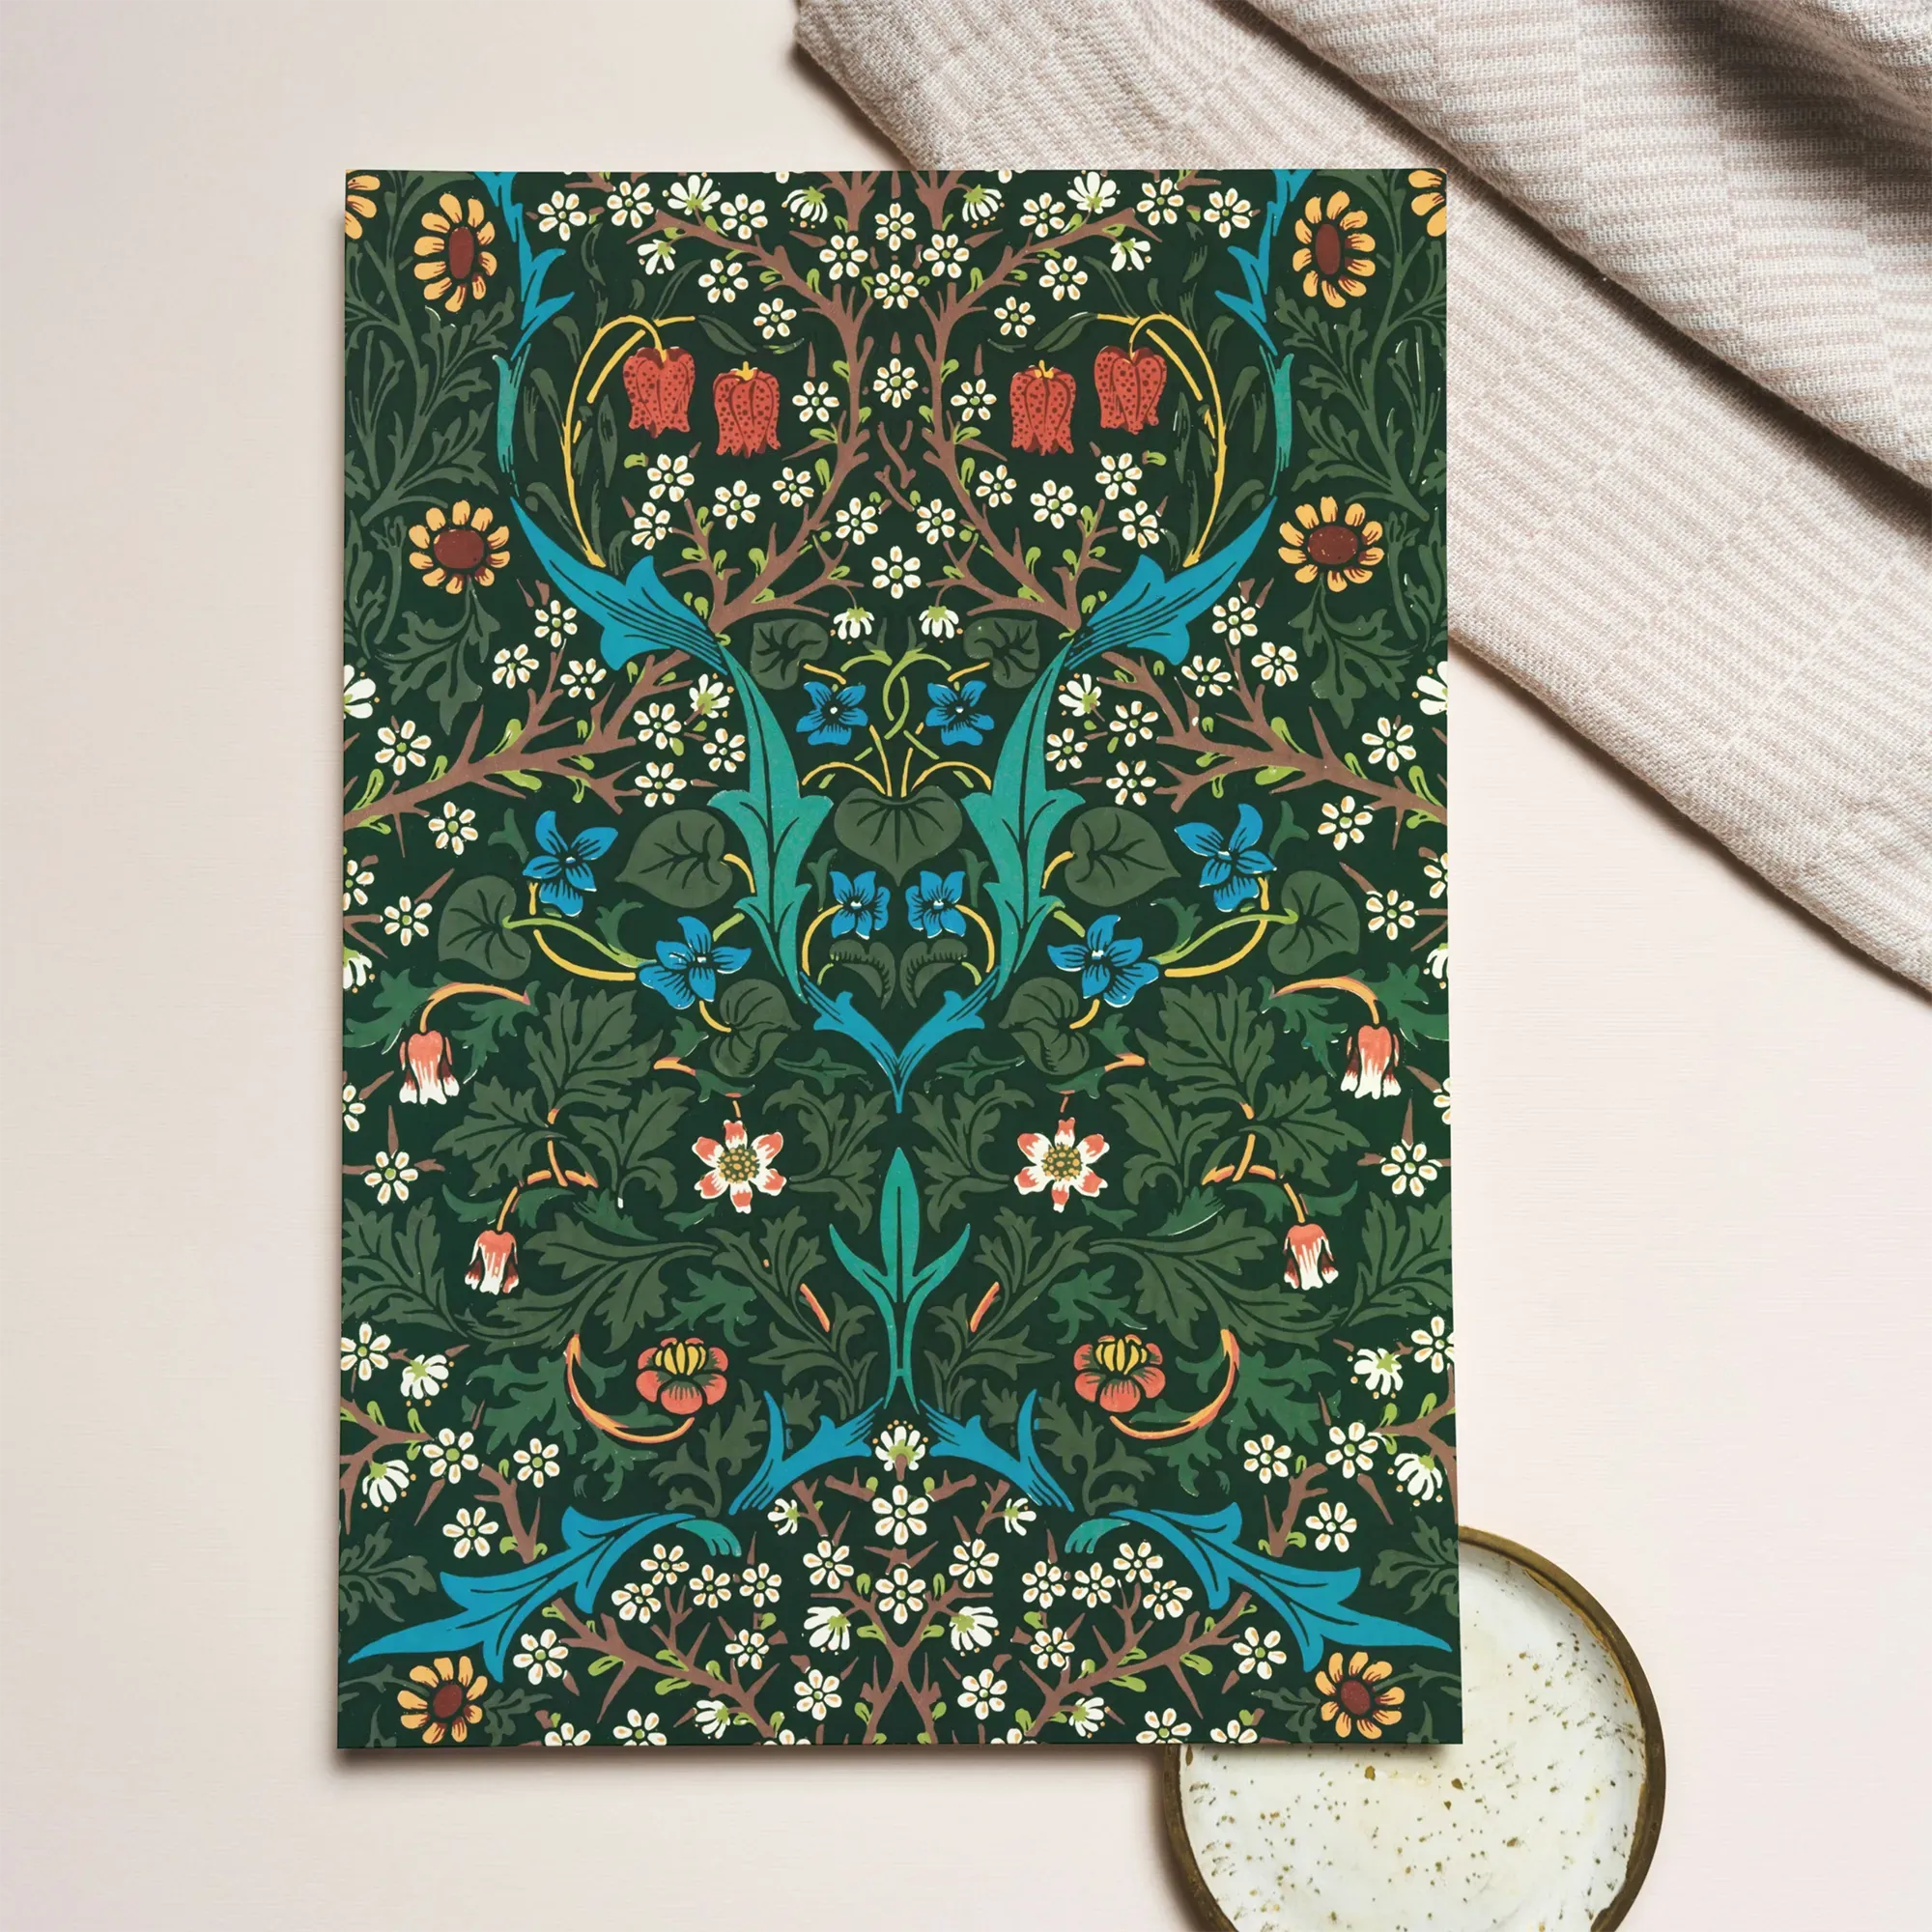 Blackthorn Hawthorn By William Morris Greeting Card - Greeting & Note Cards - Aesthetic Art